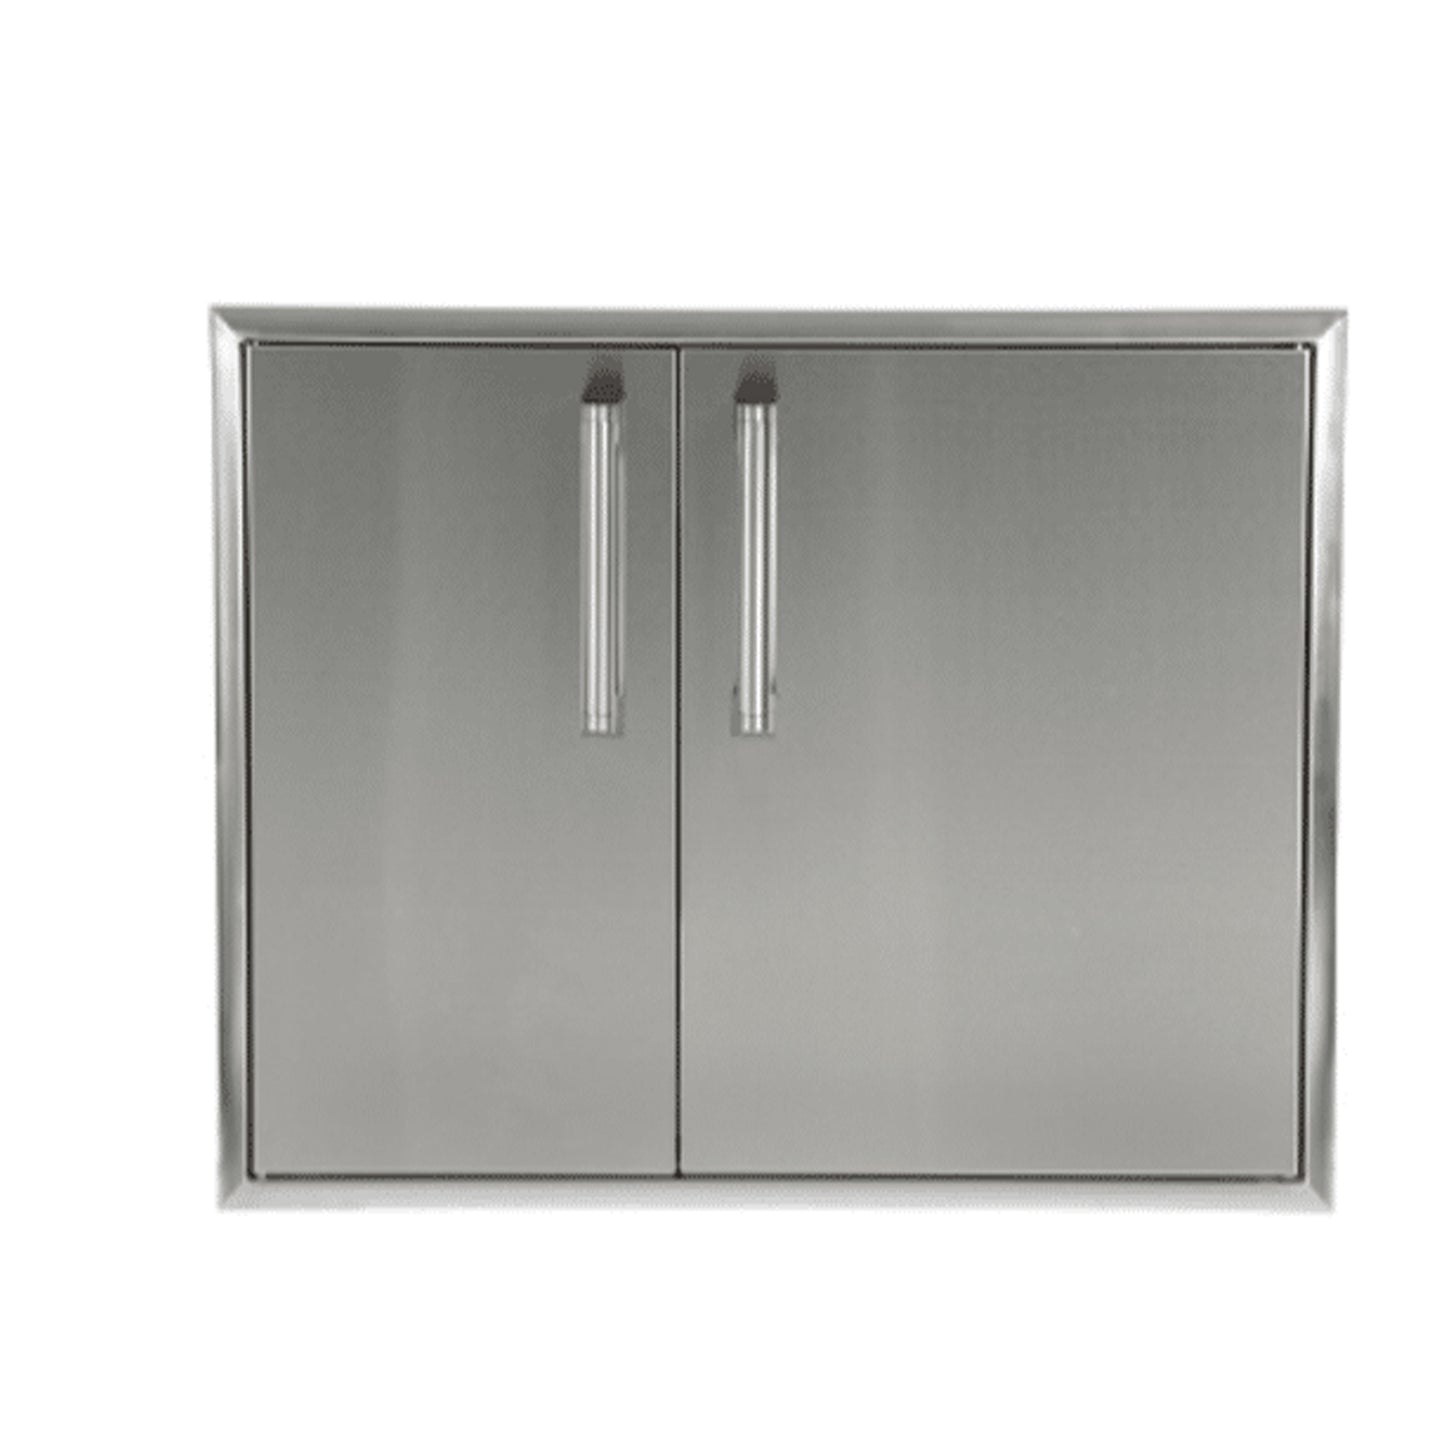 Coyote 31-Inch Dry Pantry